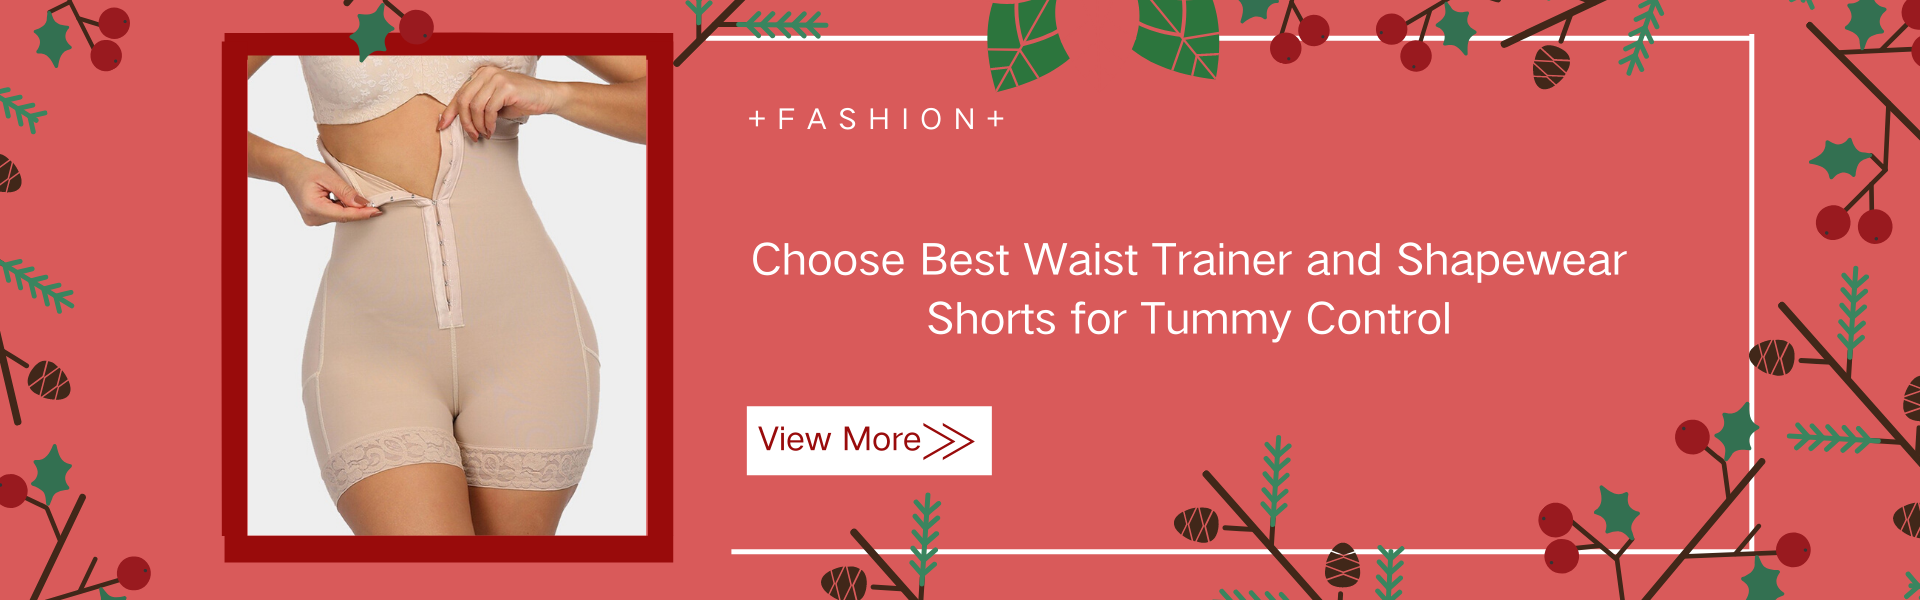 Choose Best Waist Trainer and Shapewear Shorts for Tummy Control